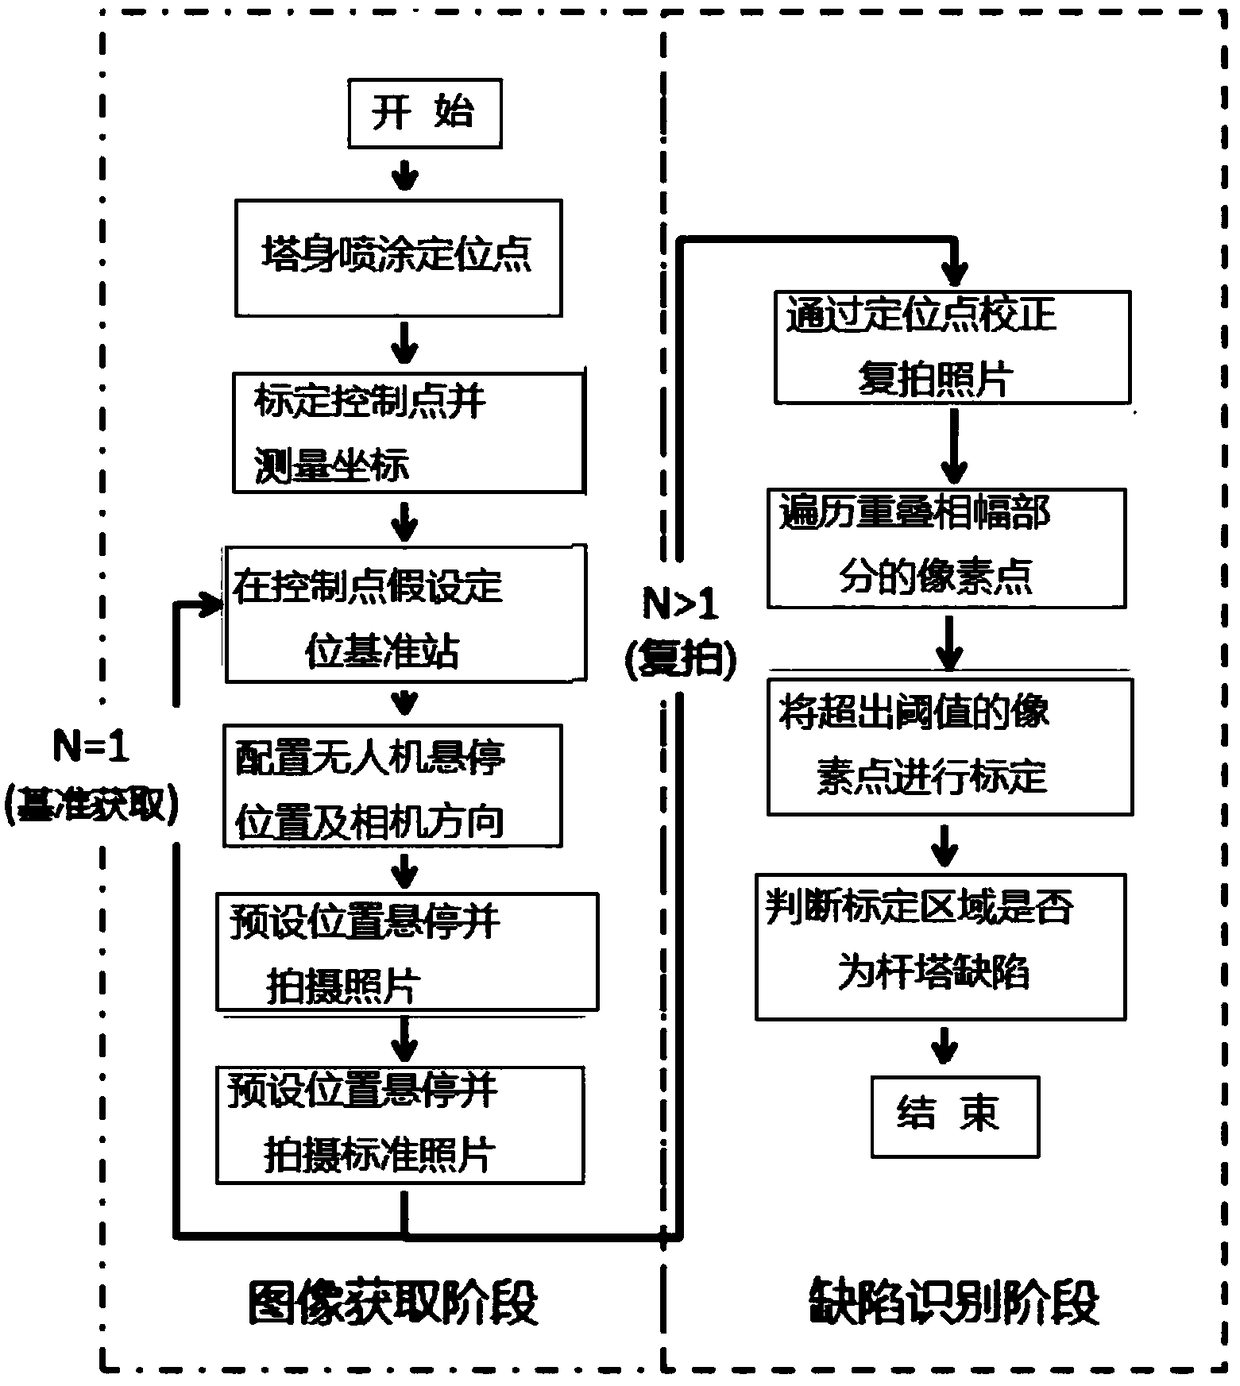 Power transmission tower defect identification method based on high-accuracy positioning multi-rotor unmanned aerial vehicle